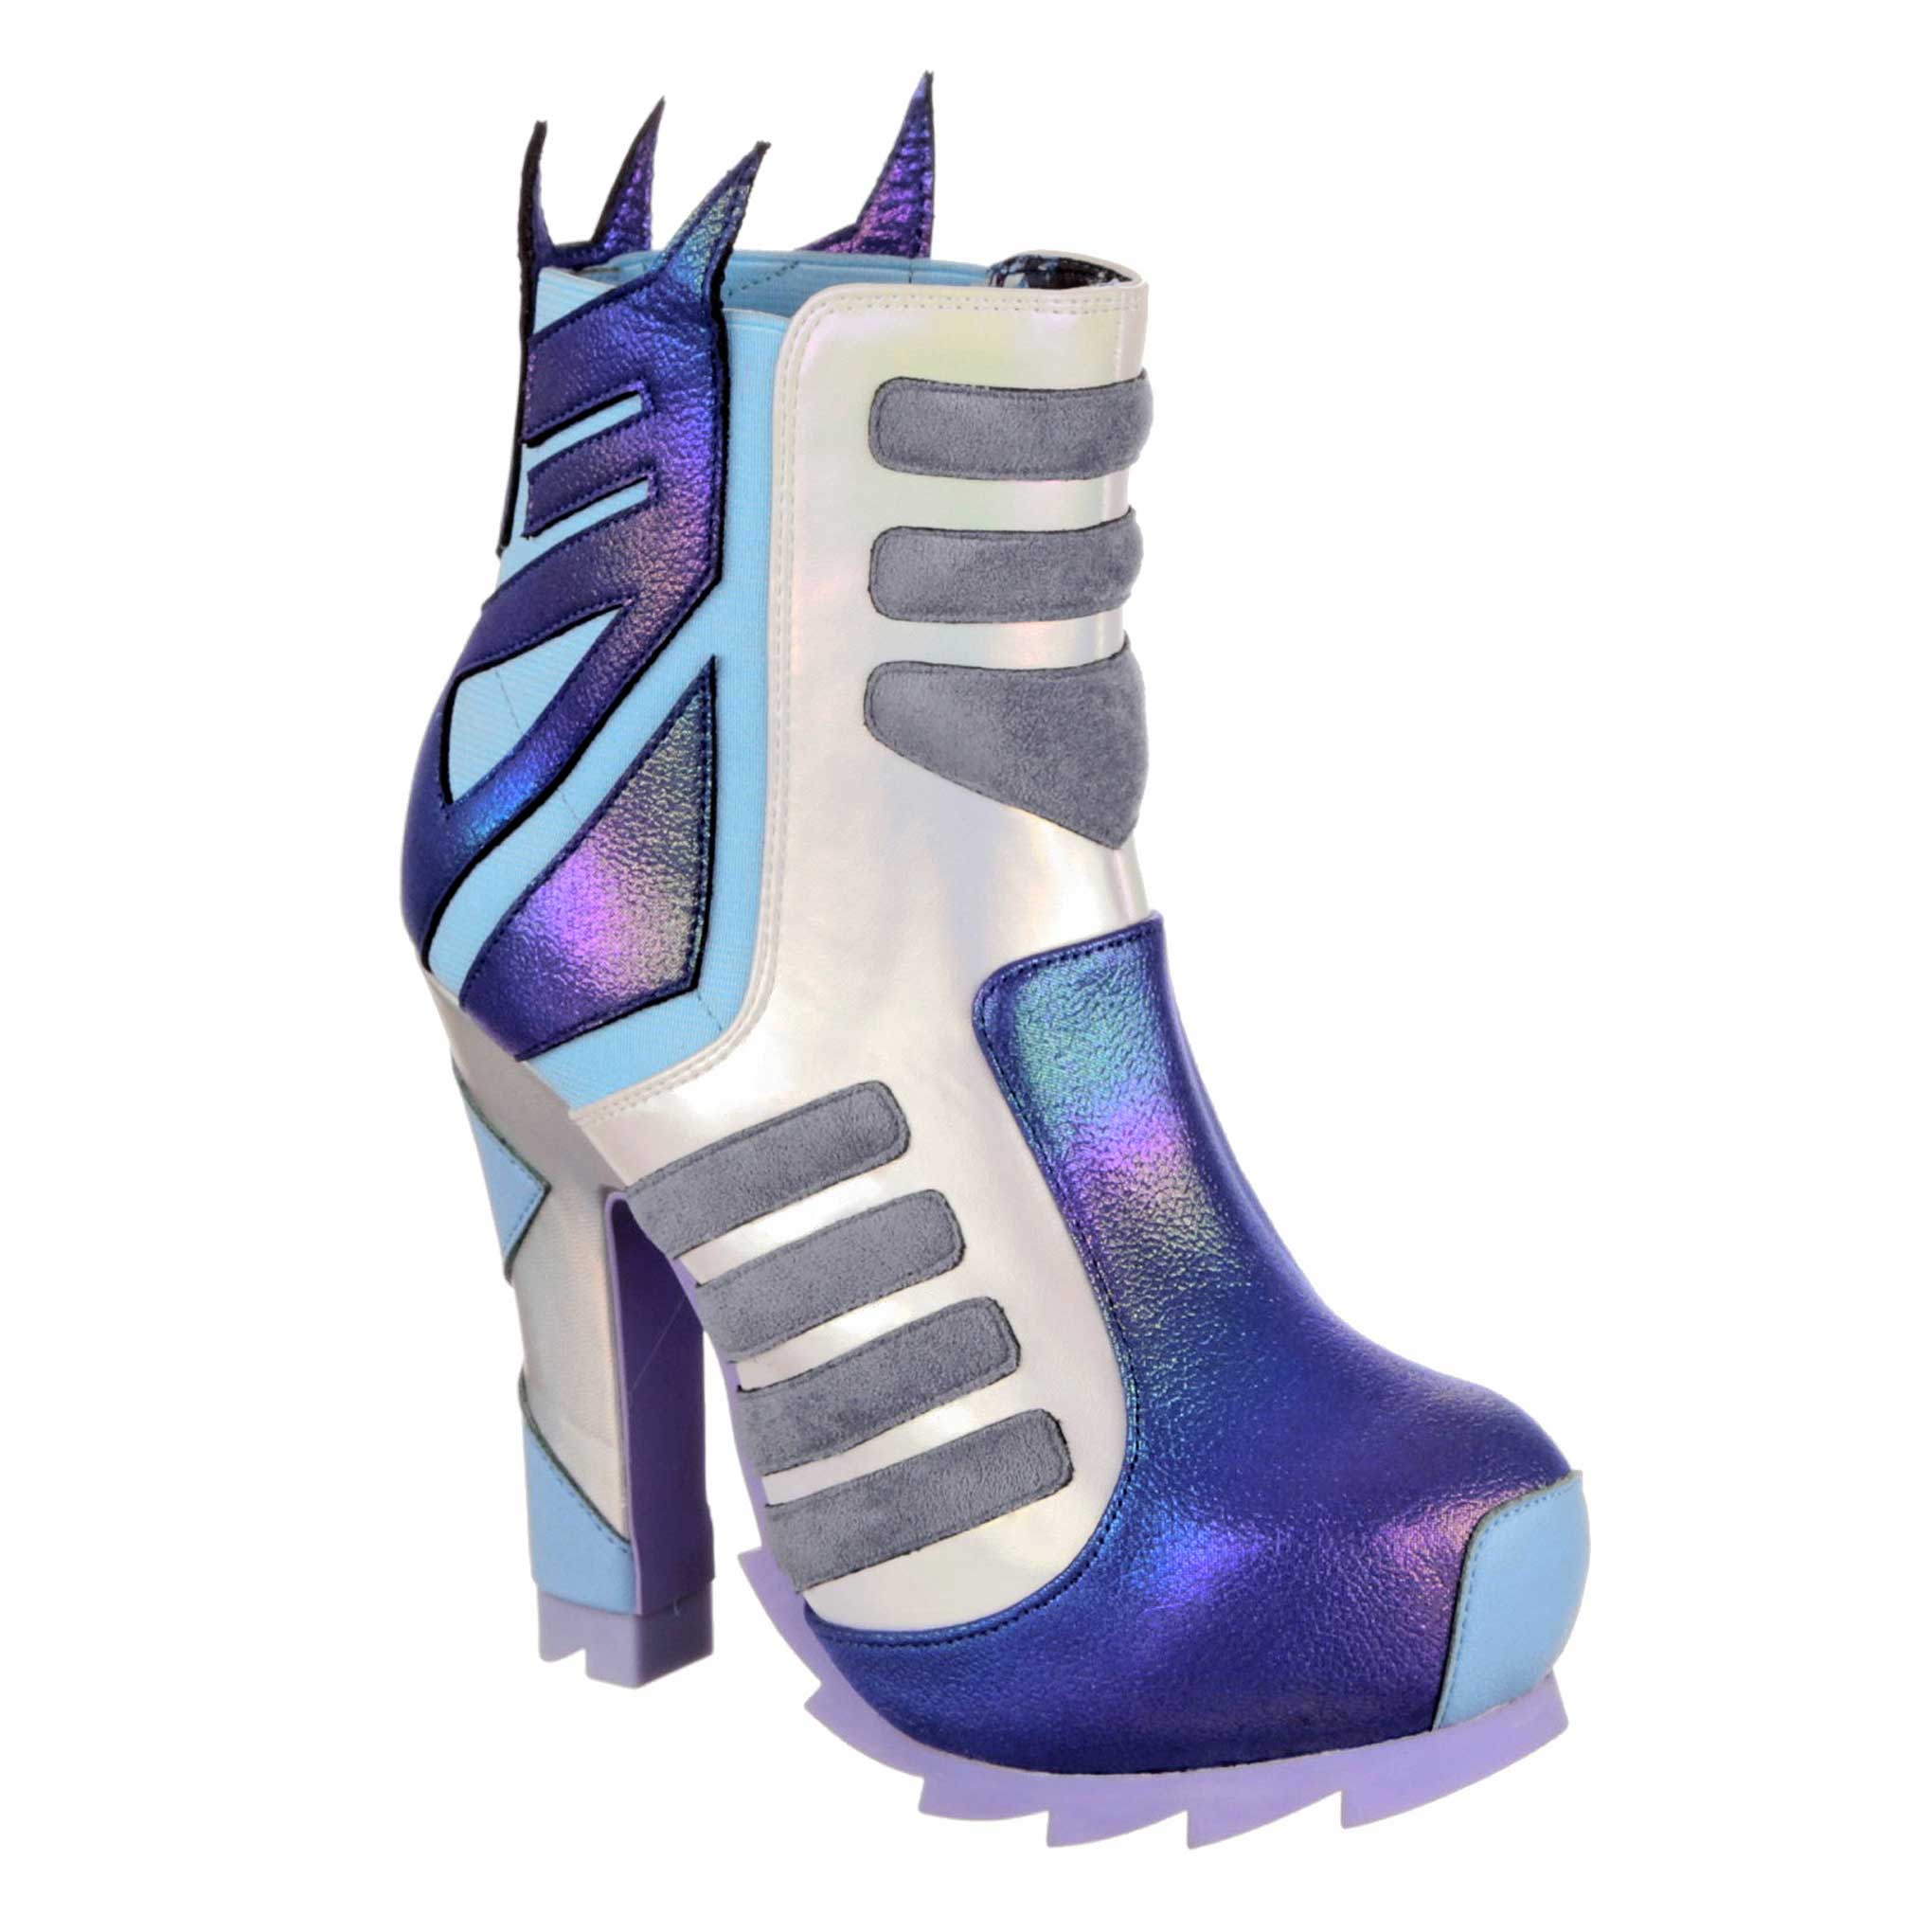 A multicoloured high-heeled ankle boot with large geometric shapes in purple, grey and light blue which is stitched onto the boot. A purple Decepticon logo on pale blue fabric wraps around the ankle whilst a chunky lilac platform soles finishes the boot. 